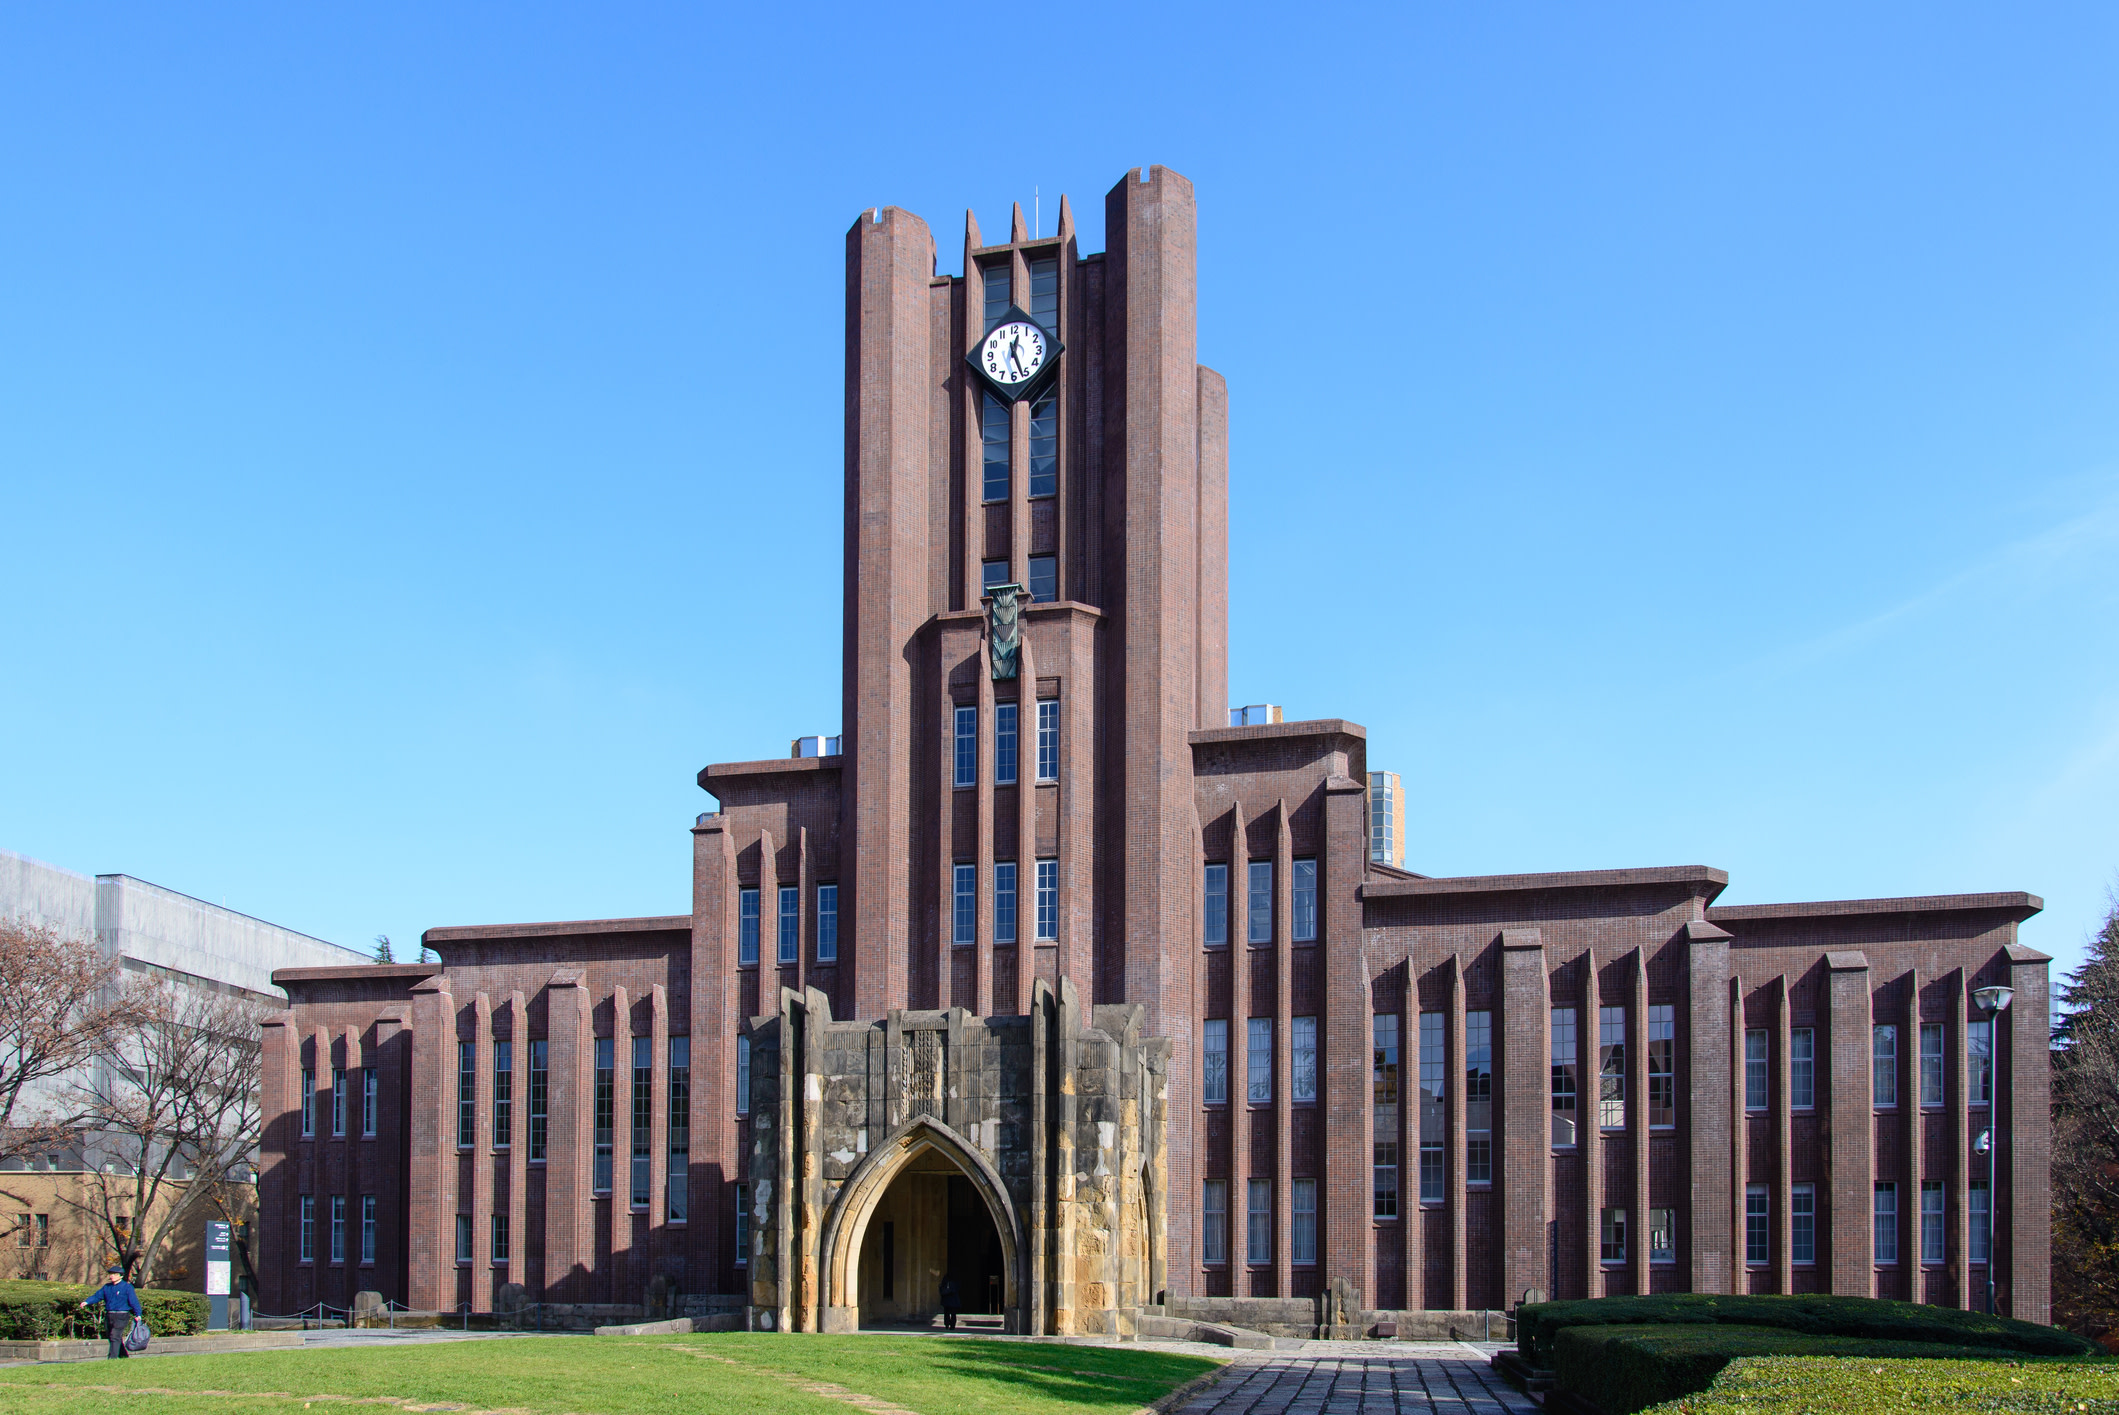 The brown brick exterior of Yasuda Auditorium at Japan's University of Tokyo, with its clock tower at the centre.